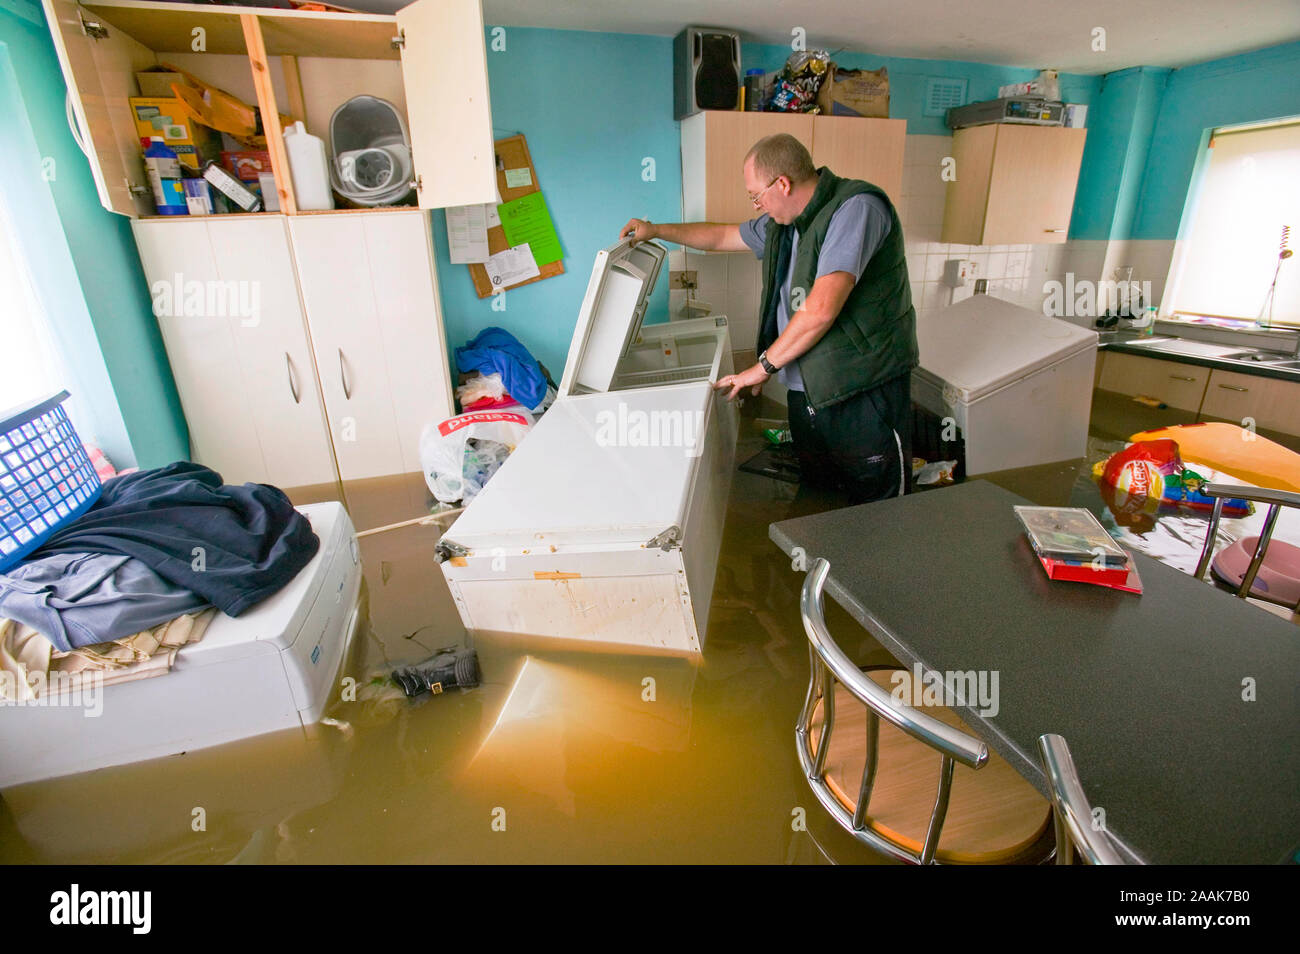 A marooned resident searches for food Inside a flooded house in Toll Bar, South Yorkshire,UK hit by unprecedented floods during June 2007. The village Stock Photo